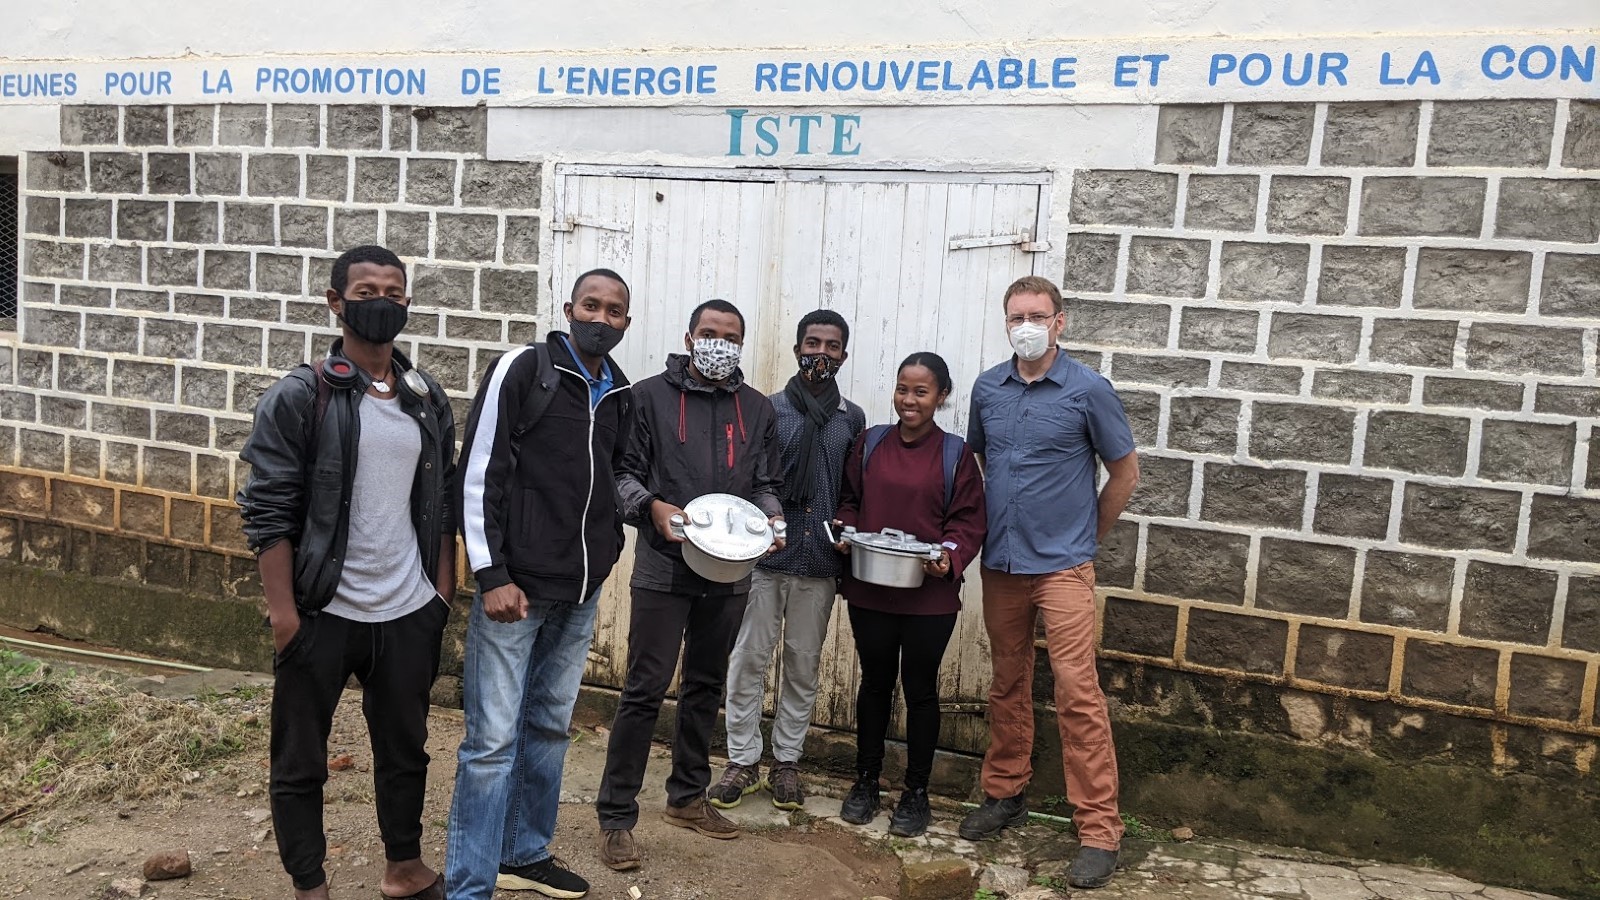 Six people stand in front of a wall. Two people hold pots and two people wear face masks.